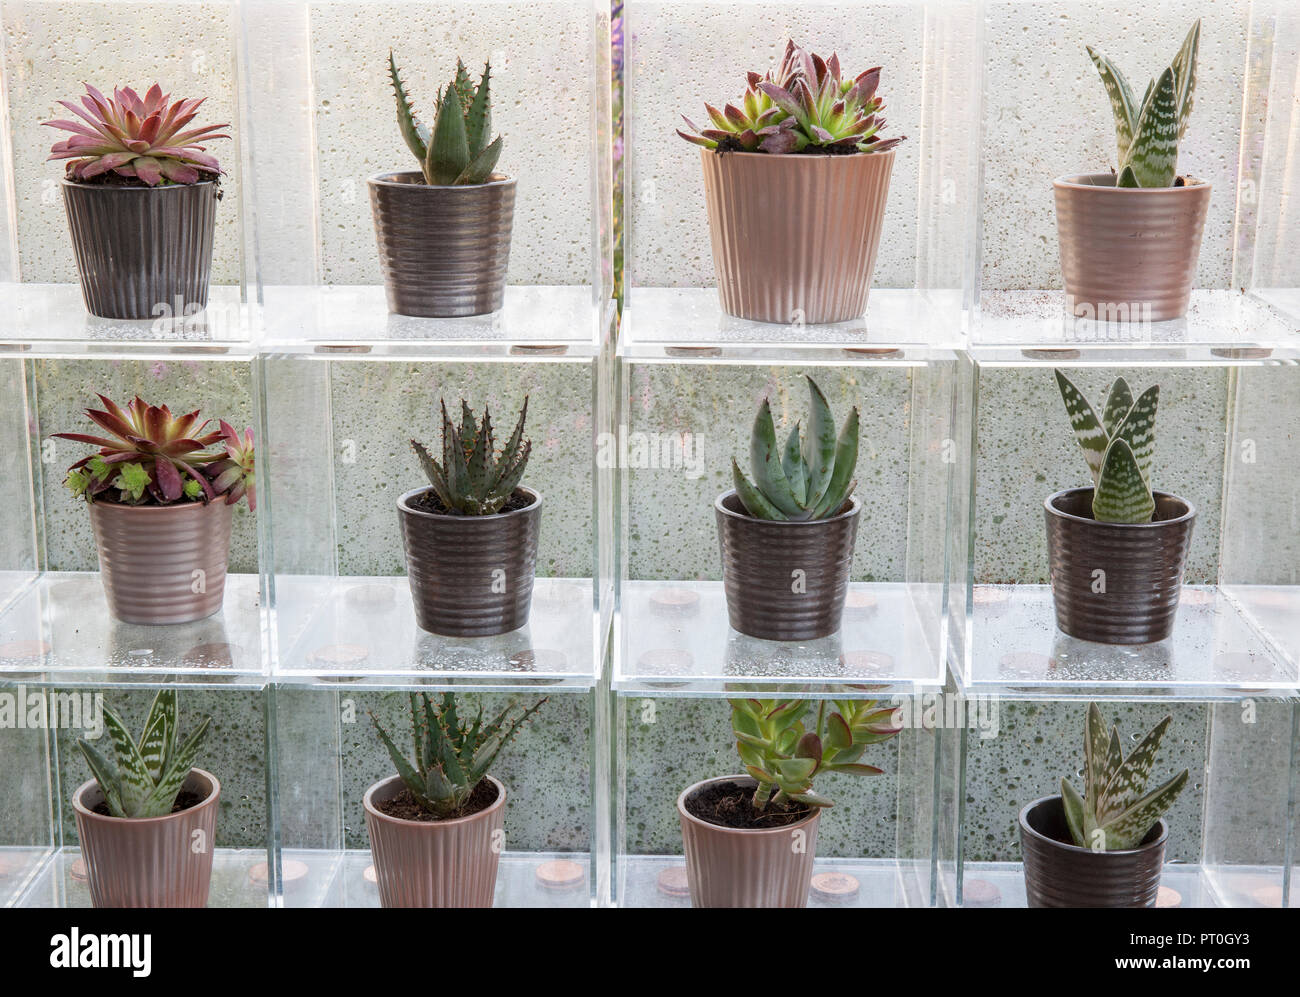 Perspex boxes displaying a collection of succulents growing in ceramic plant pots, Sempervivum, Aloe 'Paradisicum', At Home, Grow, Dine, Relax, RHS Ma Stock Photo